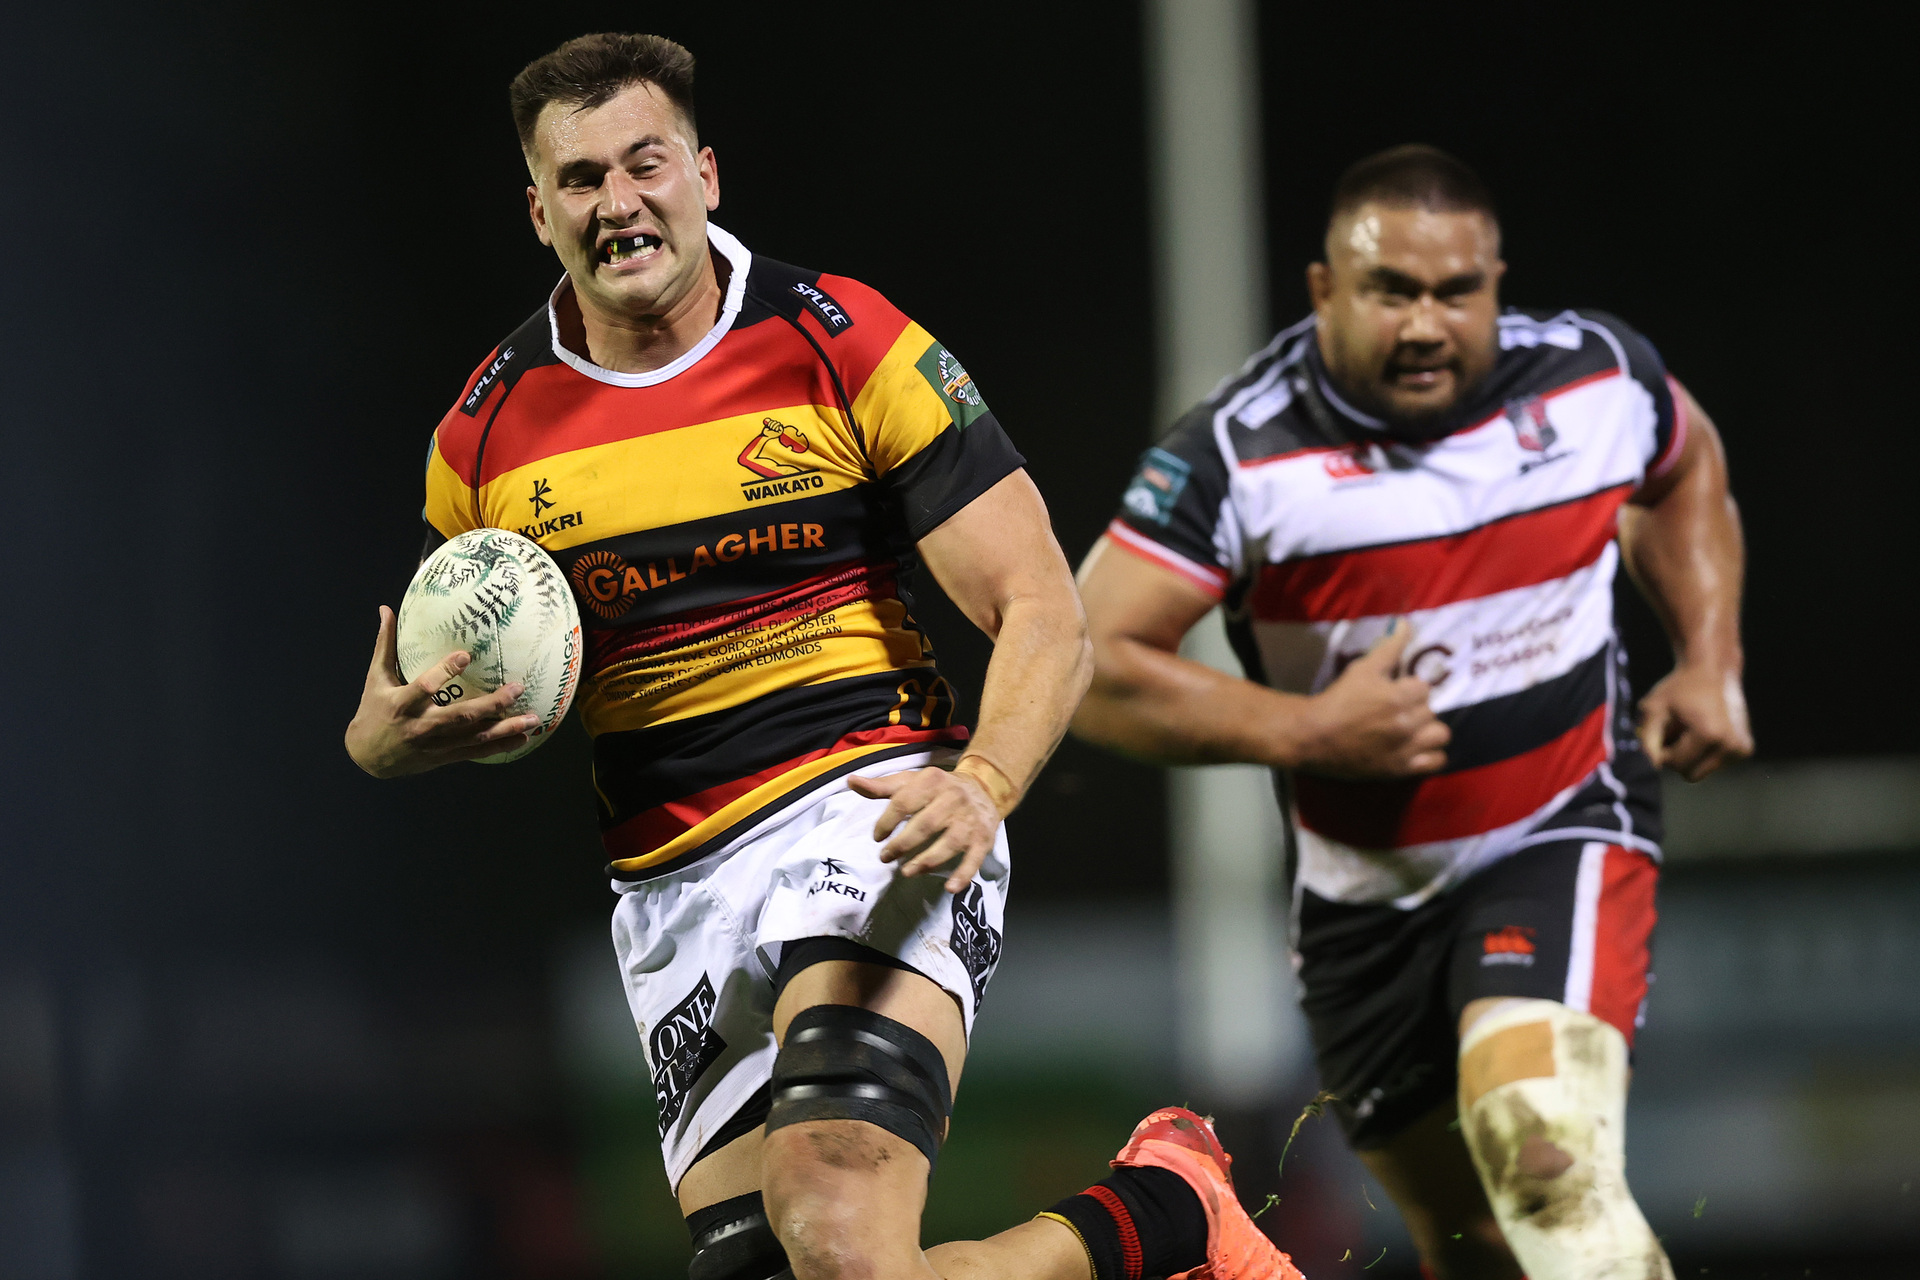 Rugby Waikato storm home to beat Counties Manukau in NPC